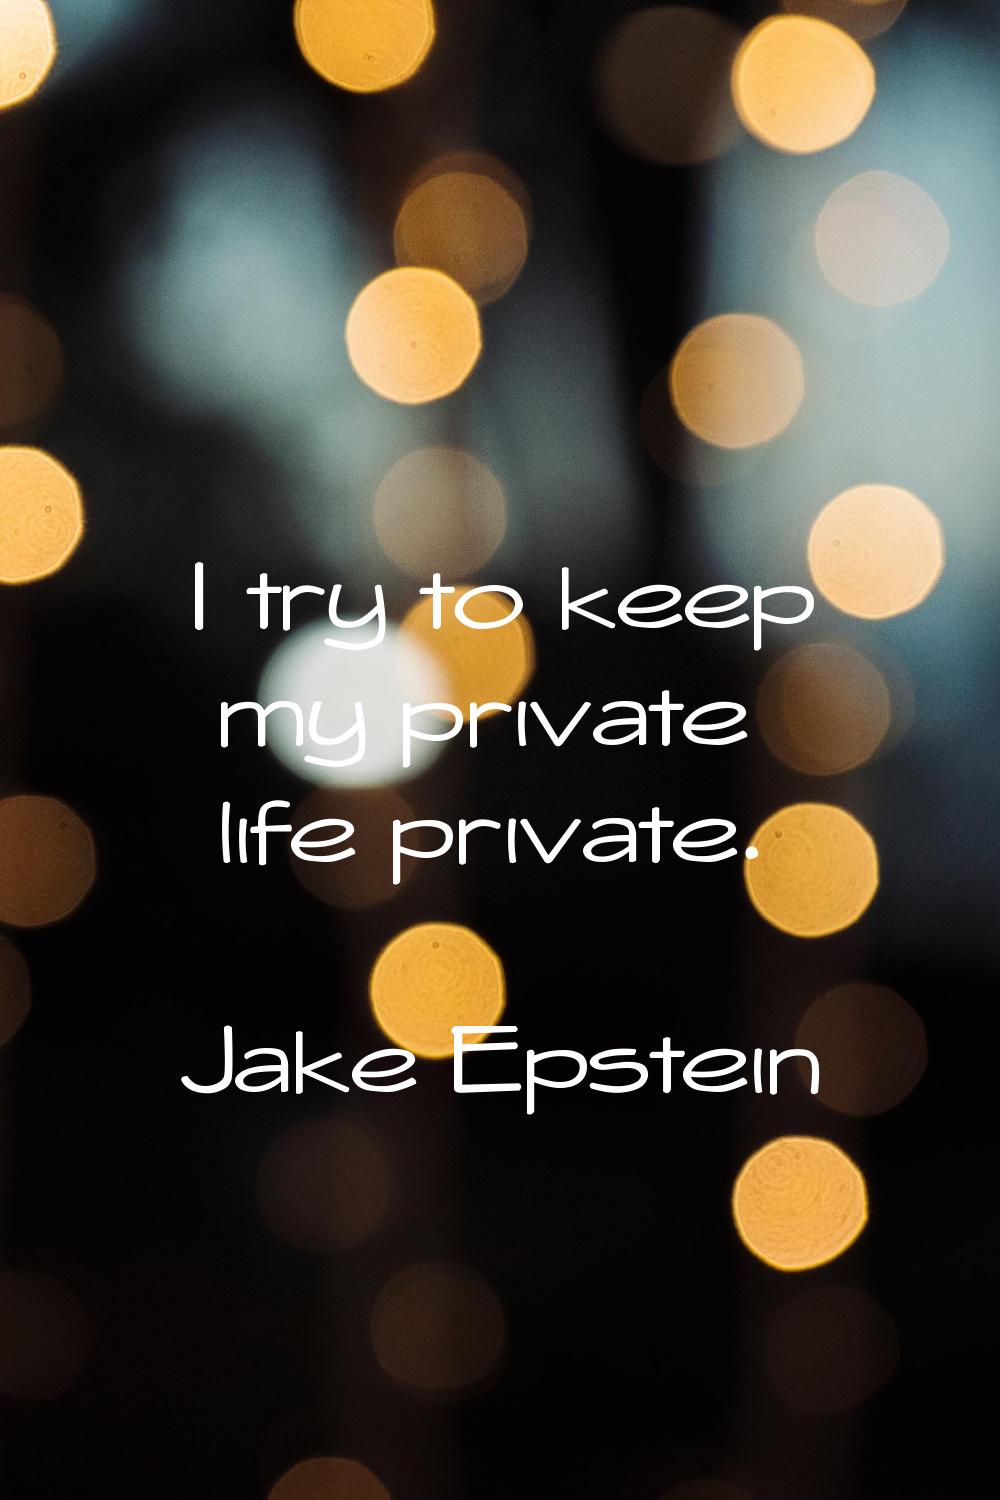 I try to keep my private life private.